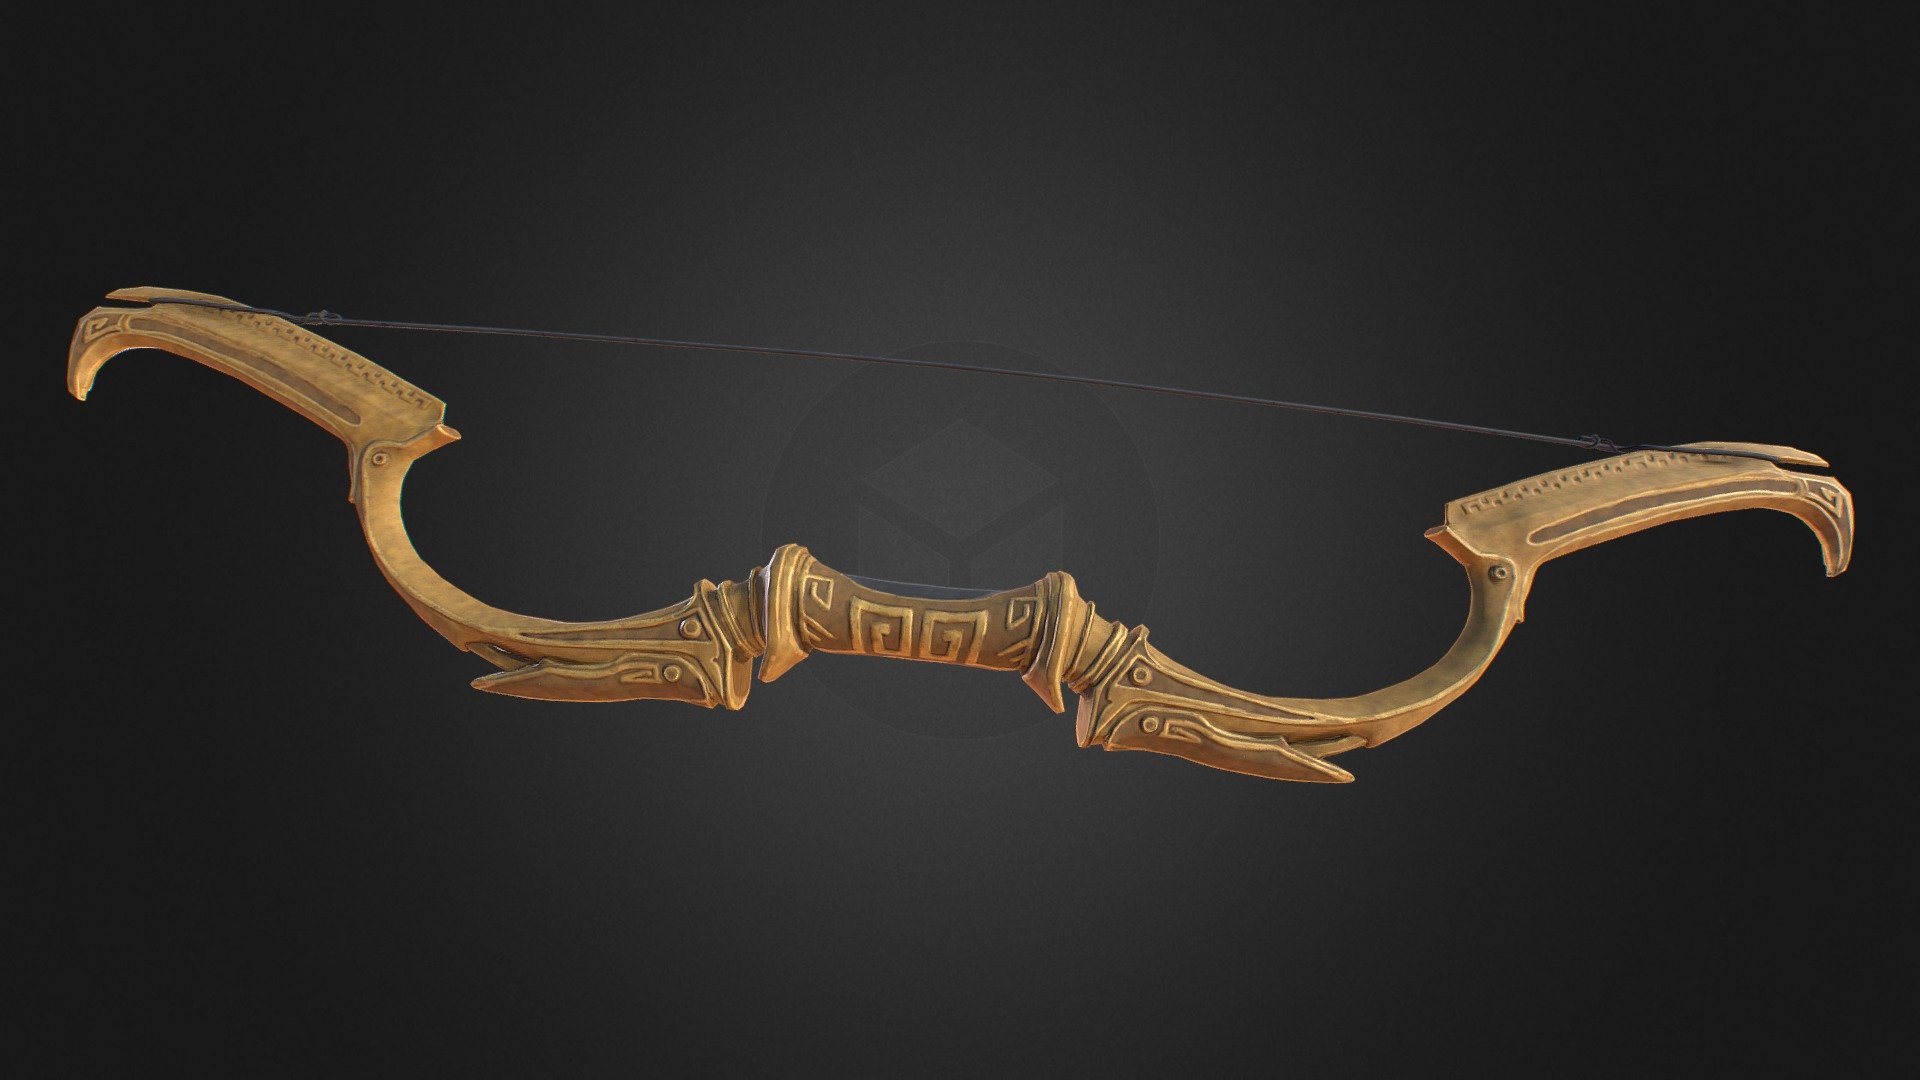 Dwemer bow from Skyrim (for Discord challenge)
Soft: Blender, ArmorPaint - Dwemer bow (Skyrim) - Download Free 3D model by Alexey_Sergeich 3d model